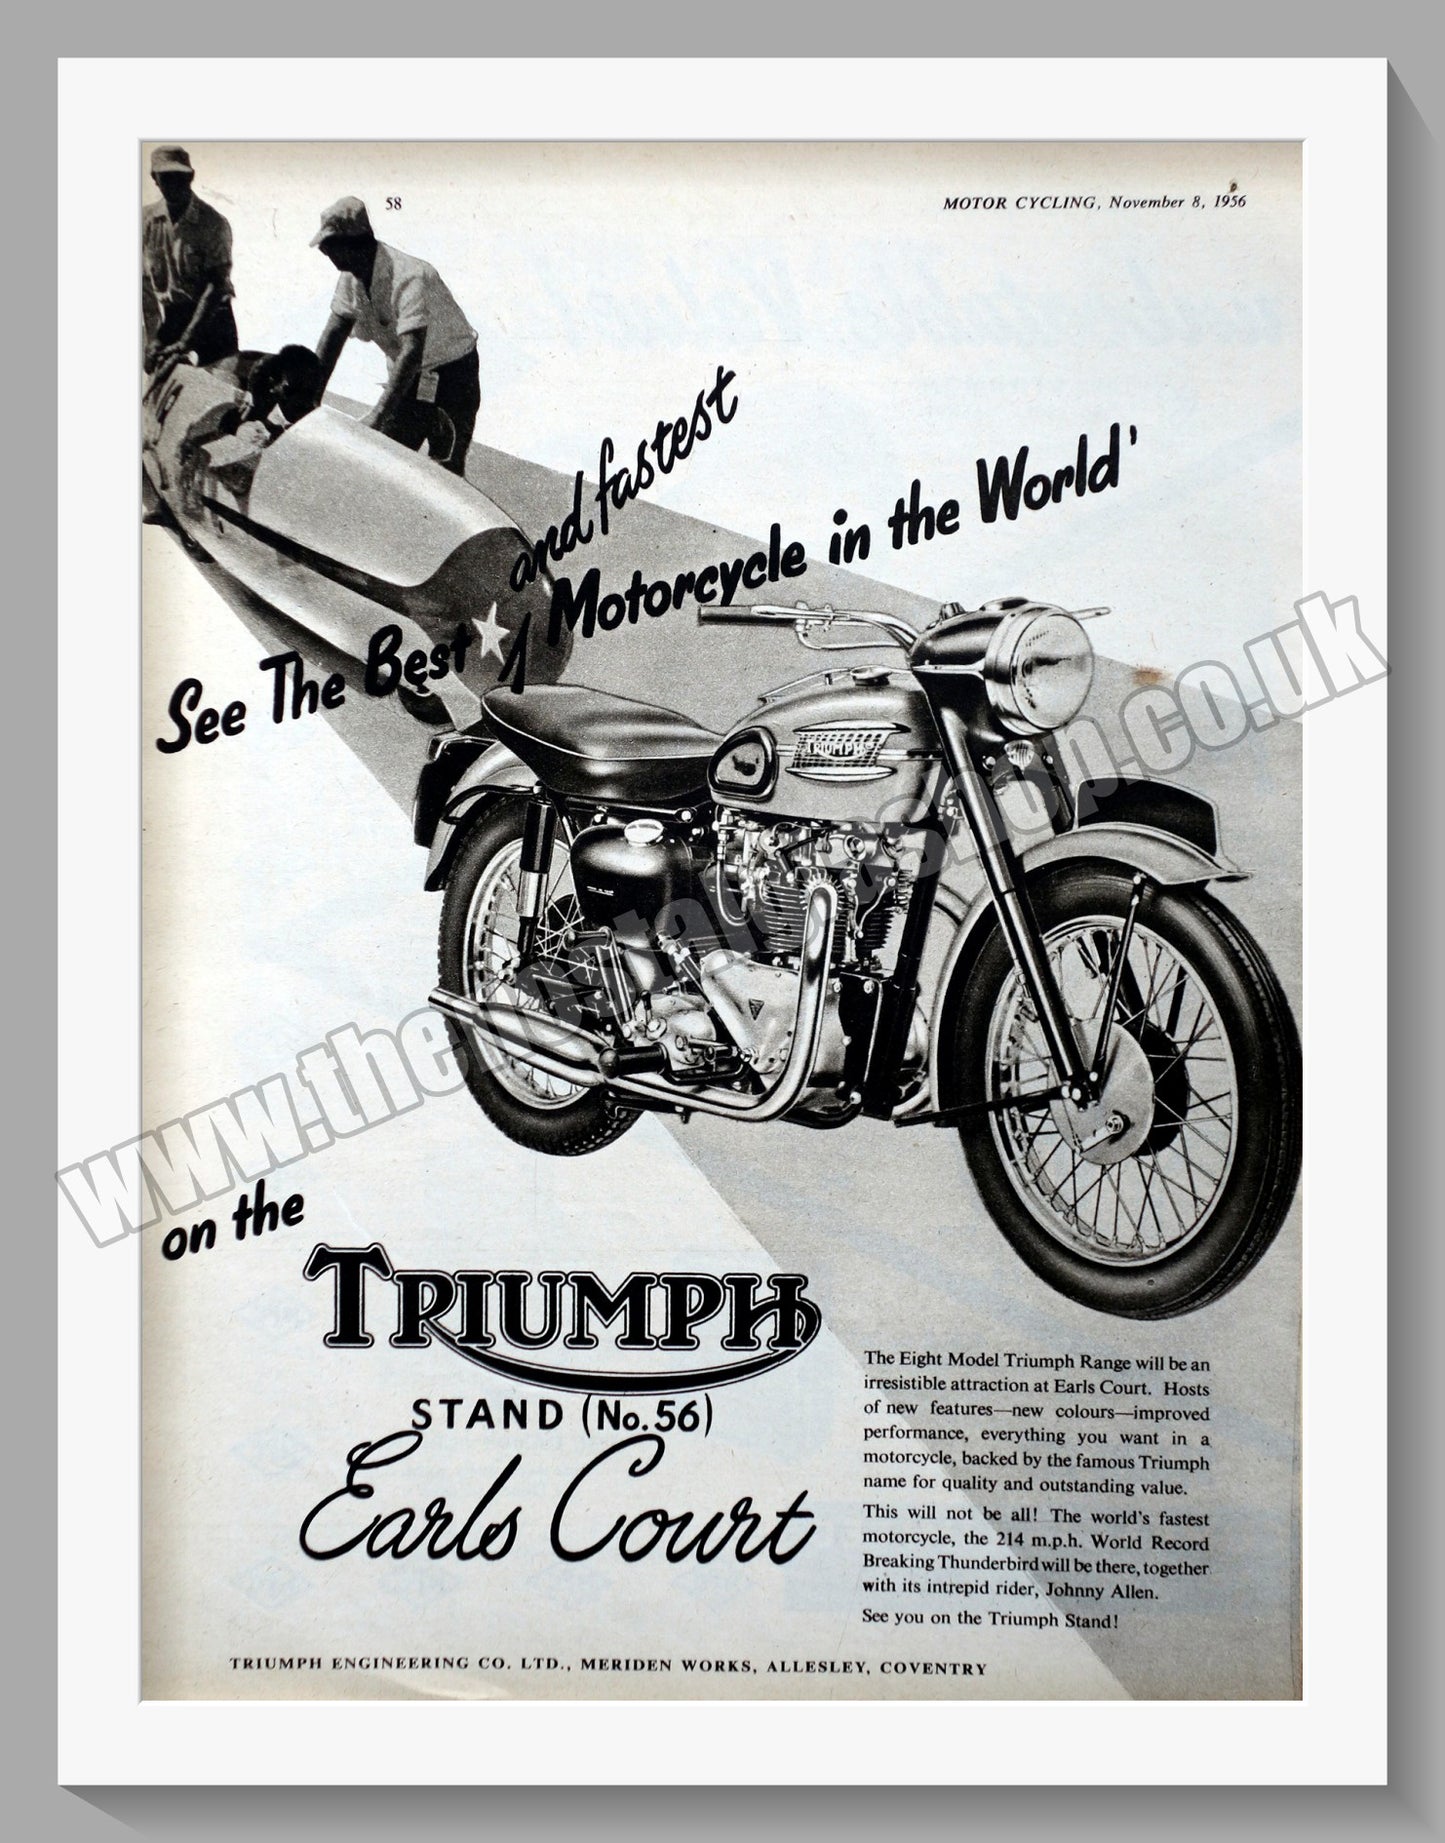 Triumph Motorcycles At Earls Court. Original advert 1956 (ref AD58017)